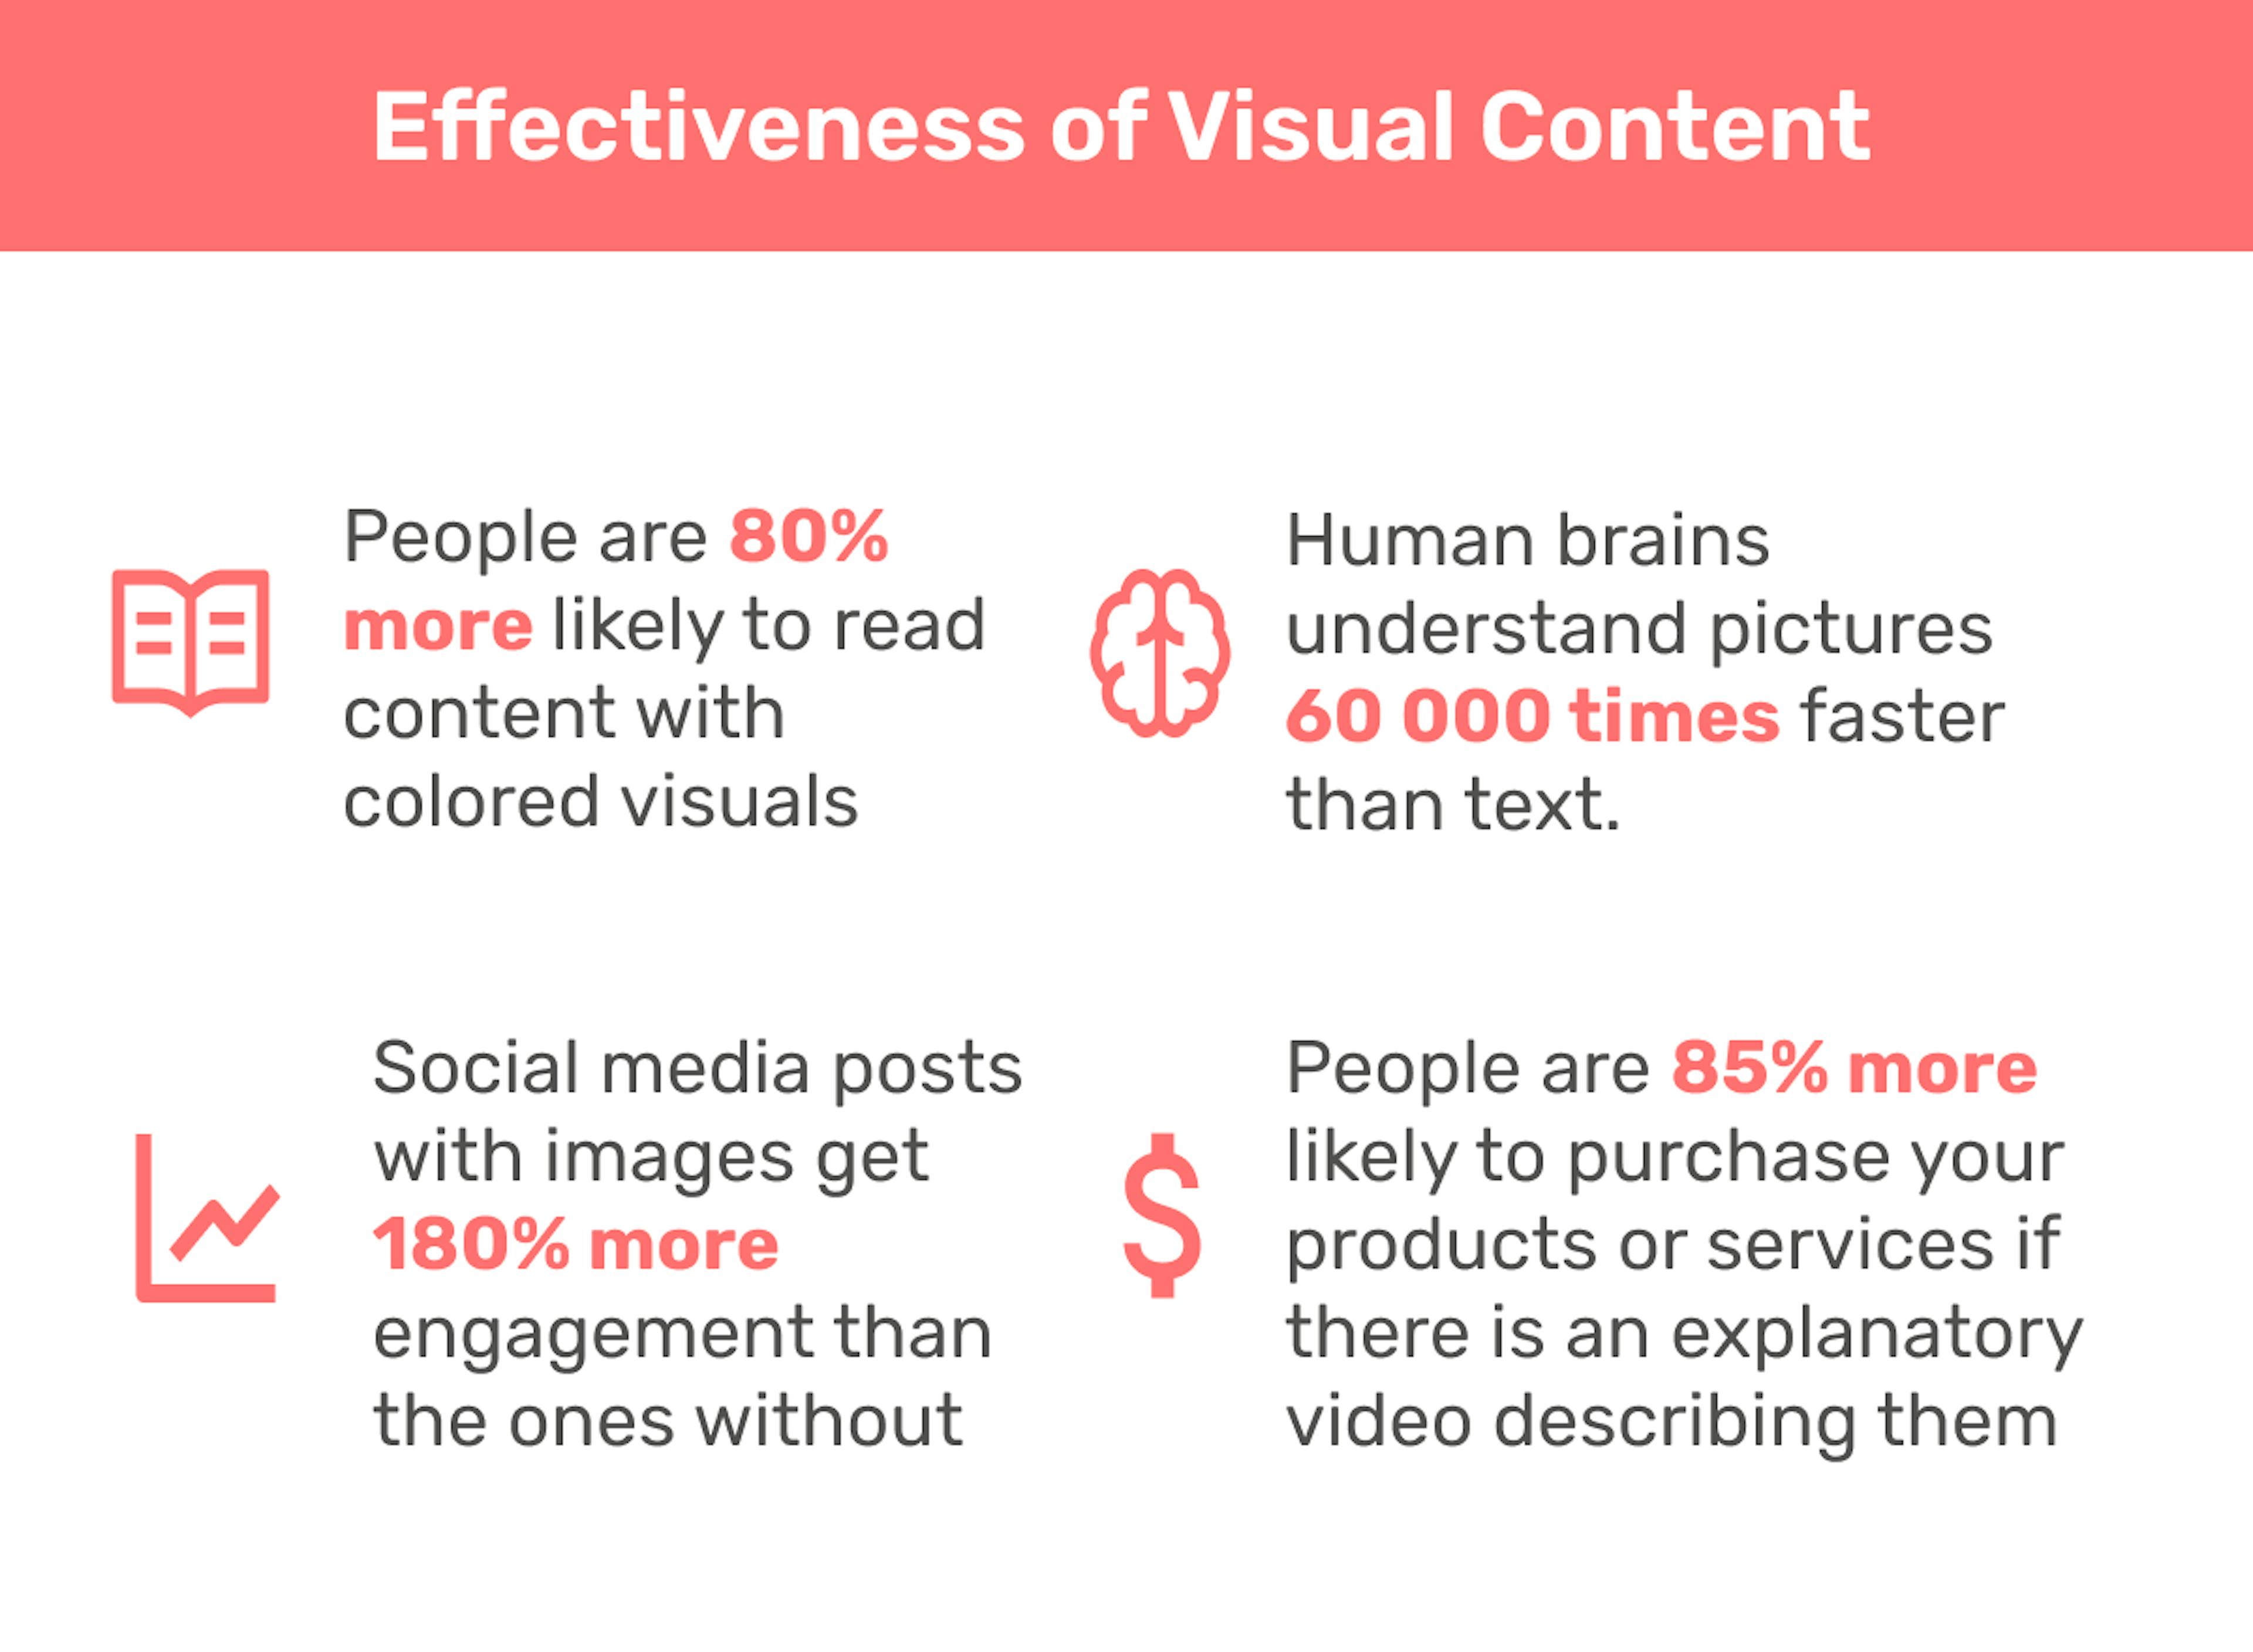 Effectiveness of visual content